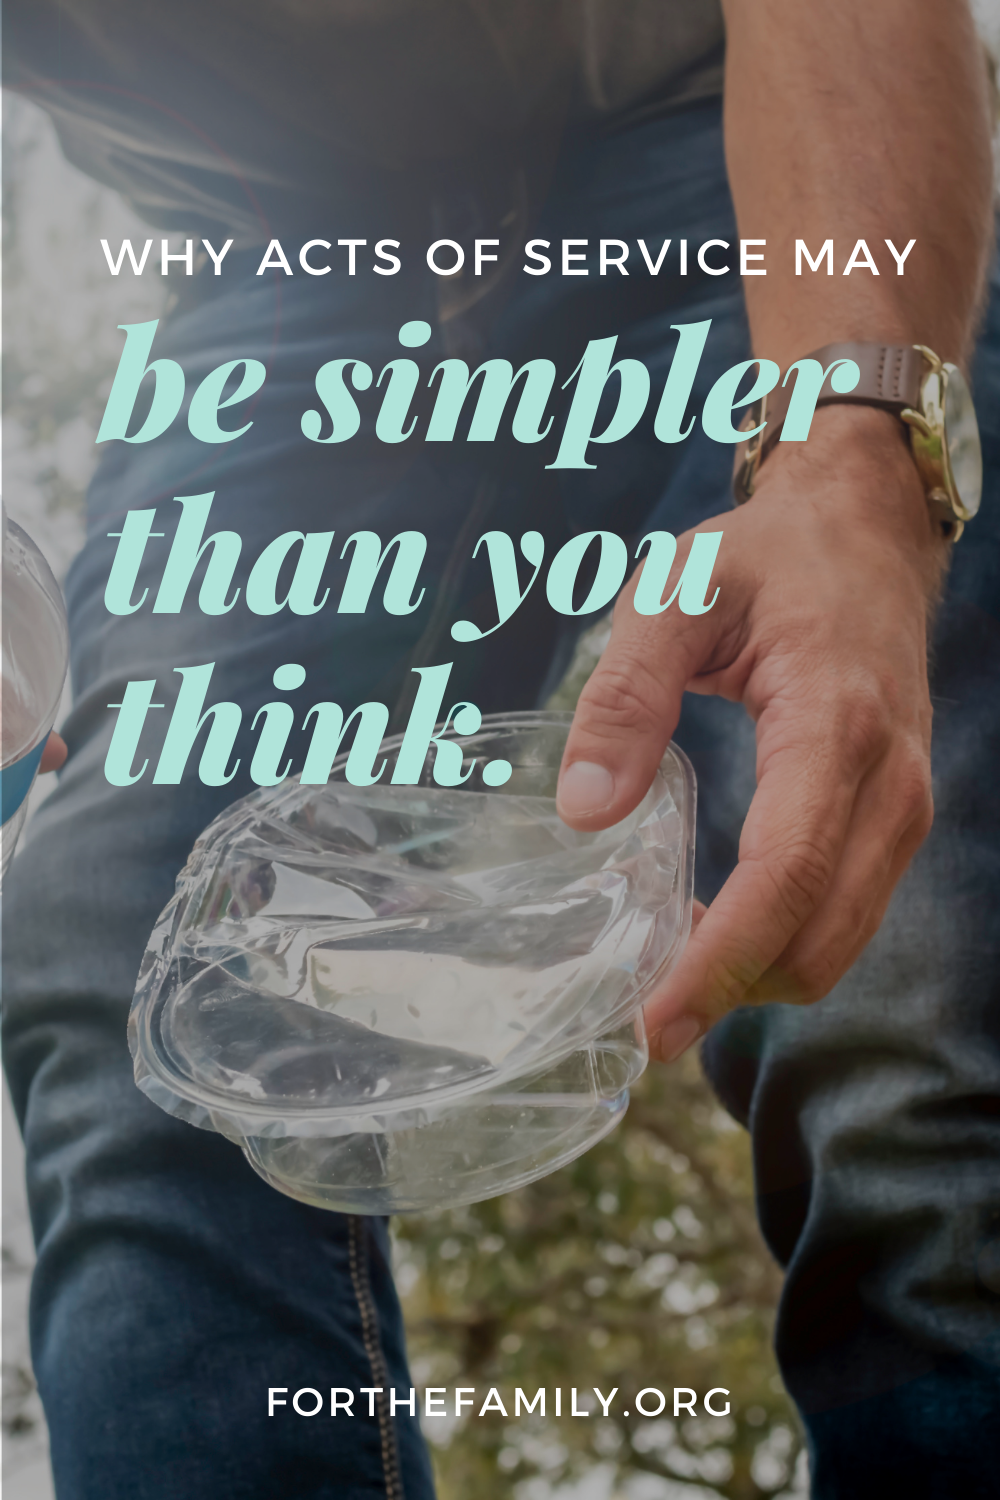 Why acts of service may be simpler than you think.